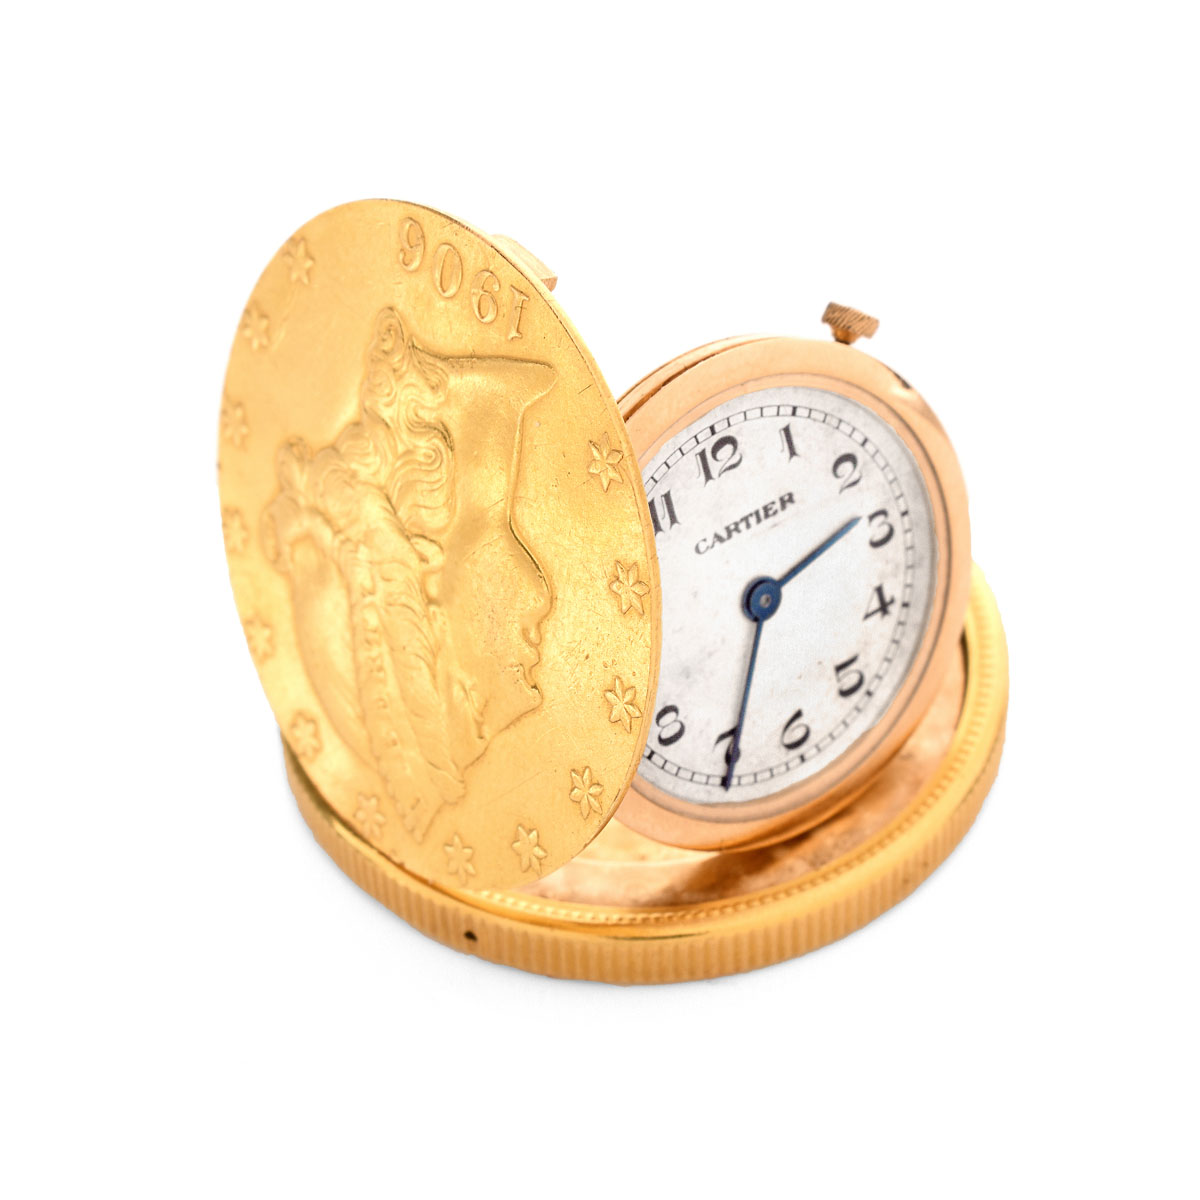 Rare and Very Fine Vintage Cartier 1906 US $20 Liberty Head Gold Coin Watch with Manual Movement. Signed to watch face, appears to be numbered to case back.